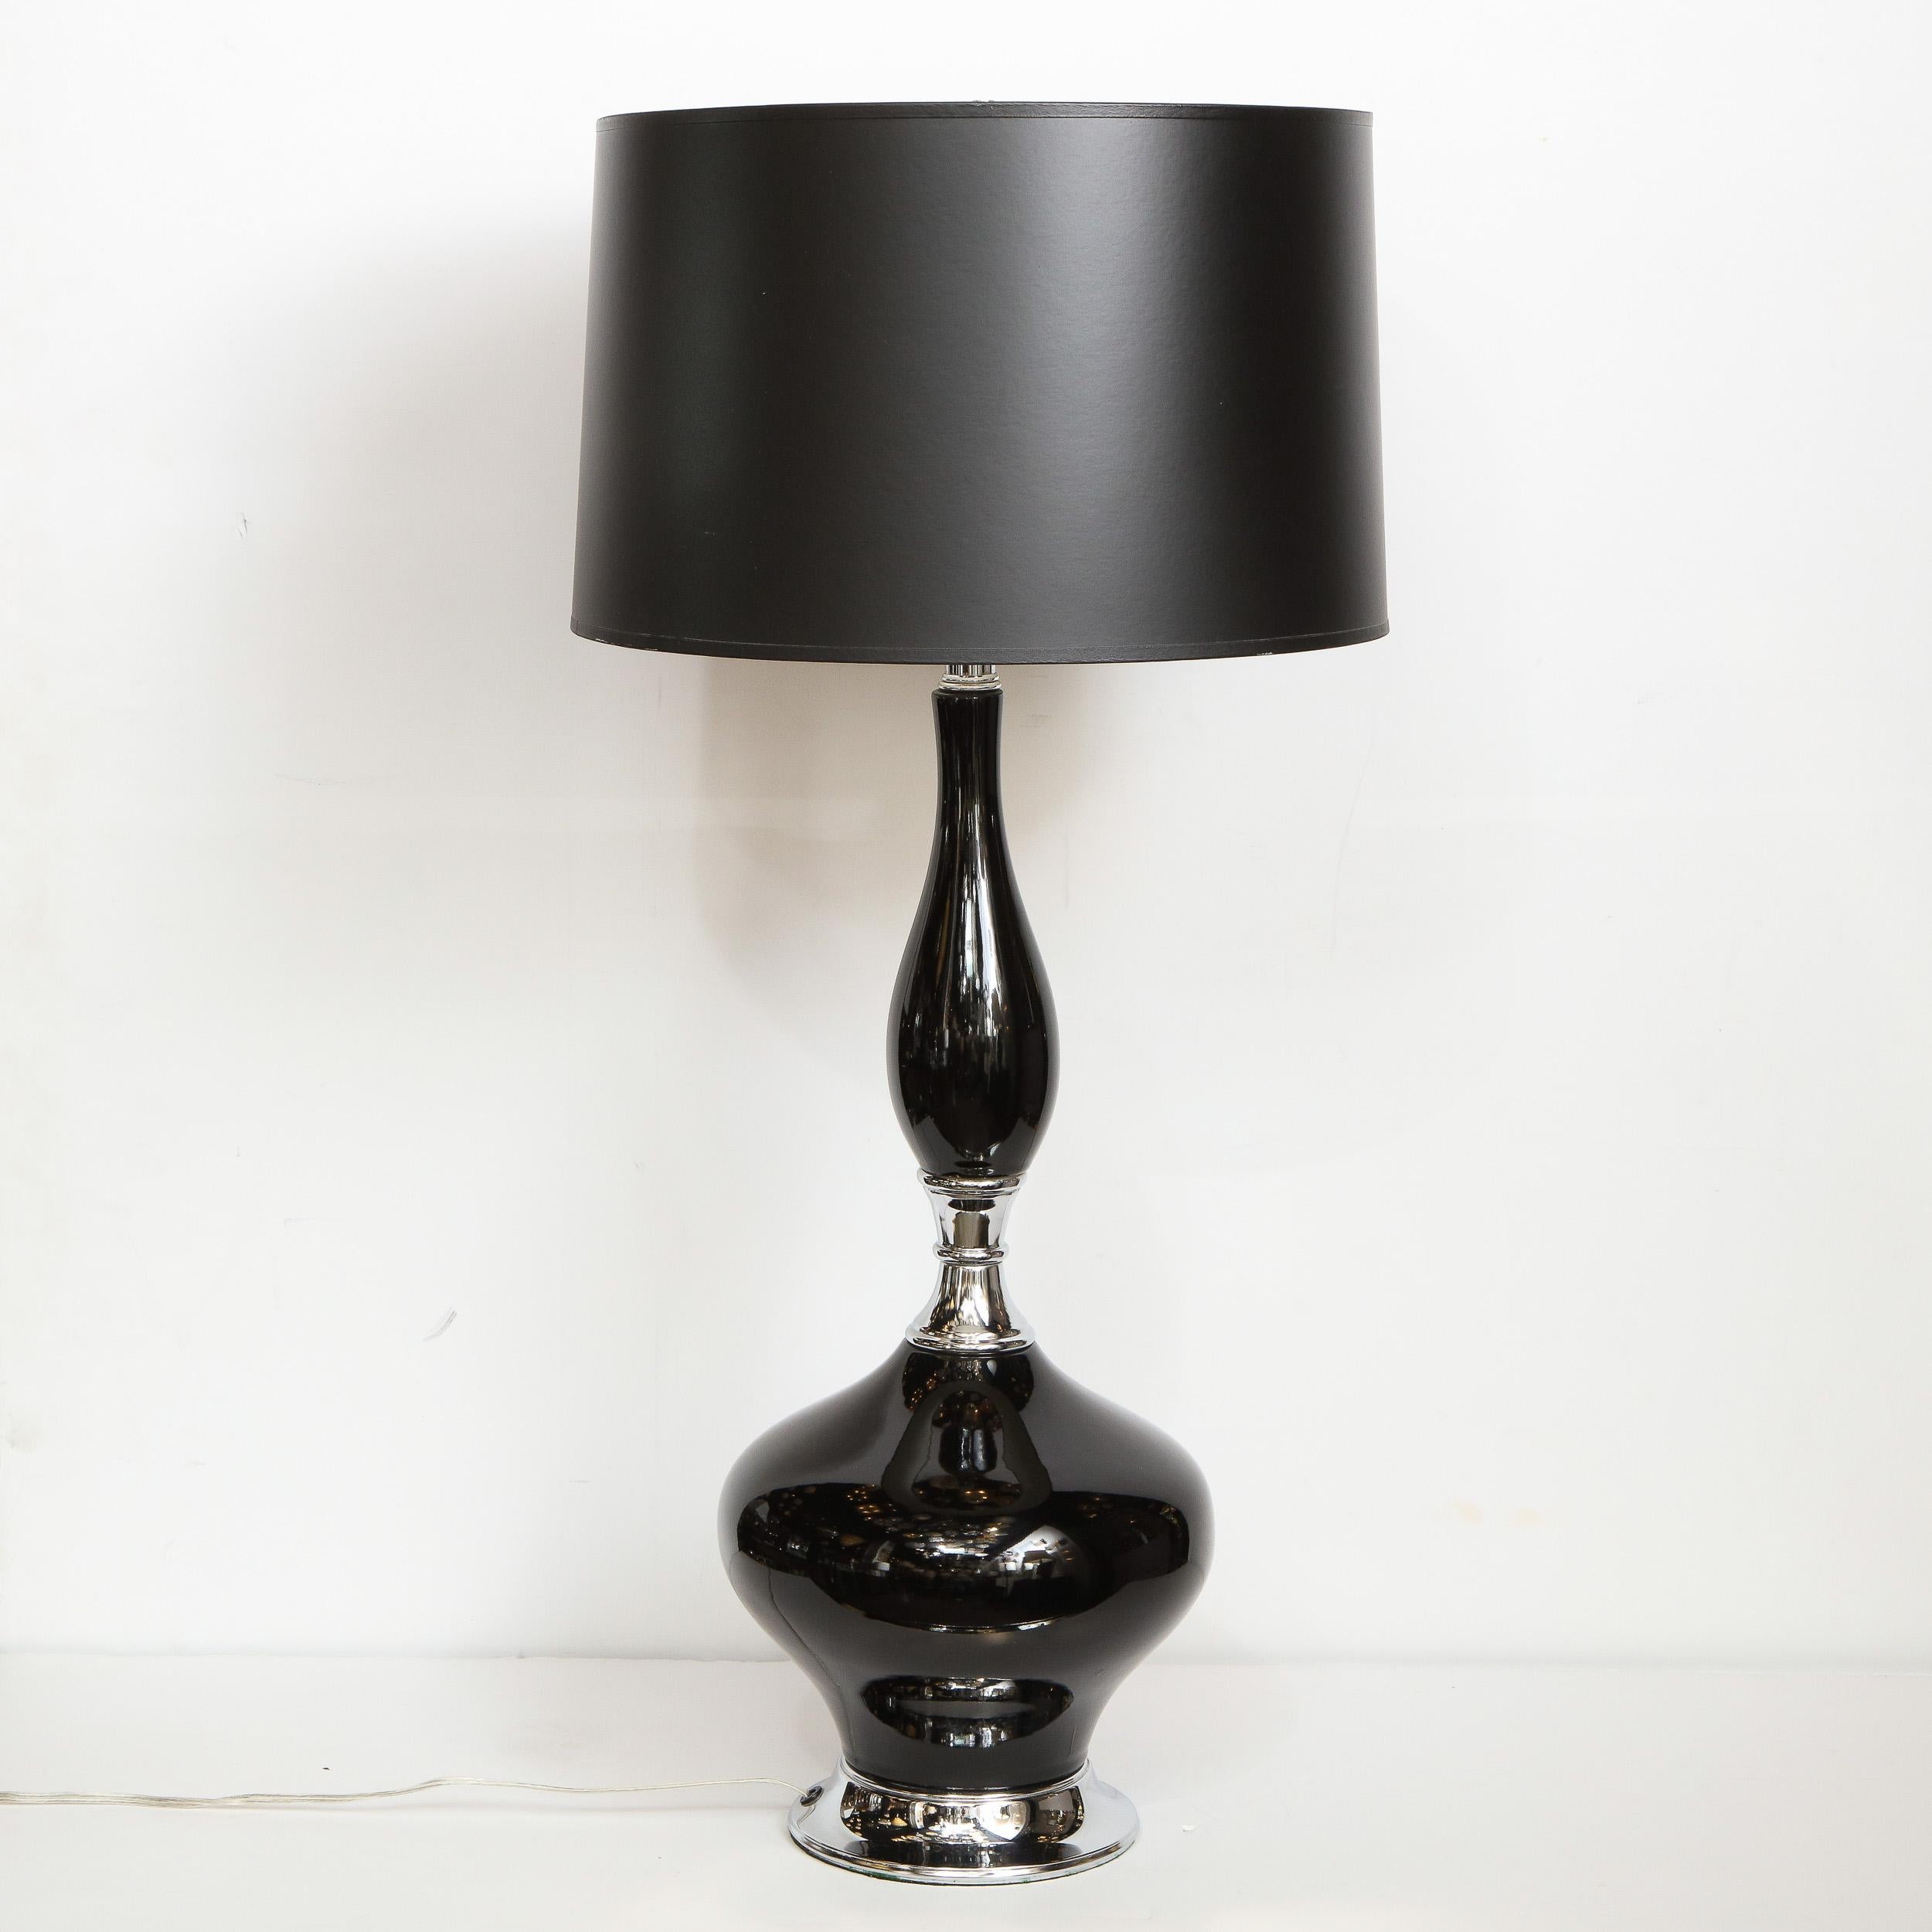 Mid-20th Century Mid-Century Modern Sculptural Black Glazed Ceramic Lamp with Chrome Base For Sale